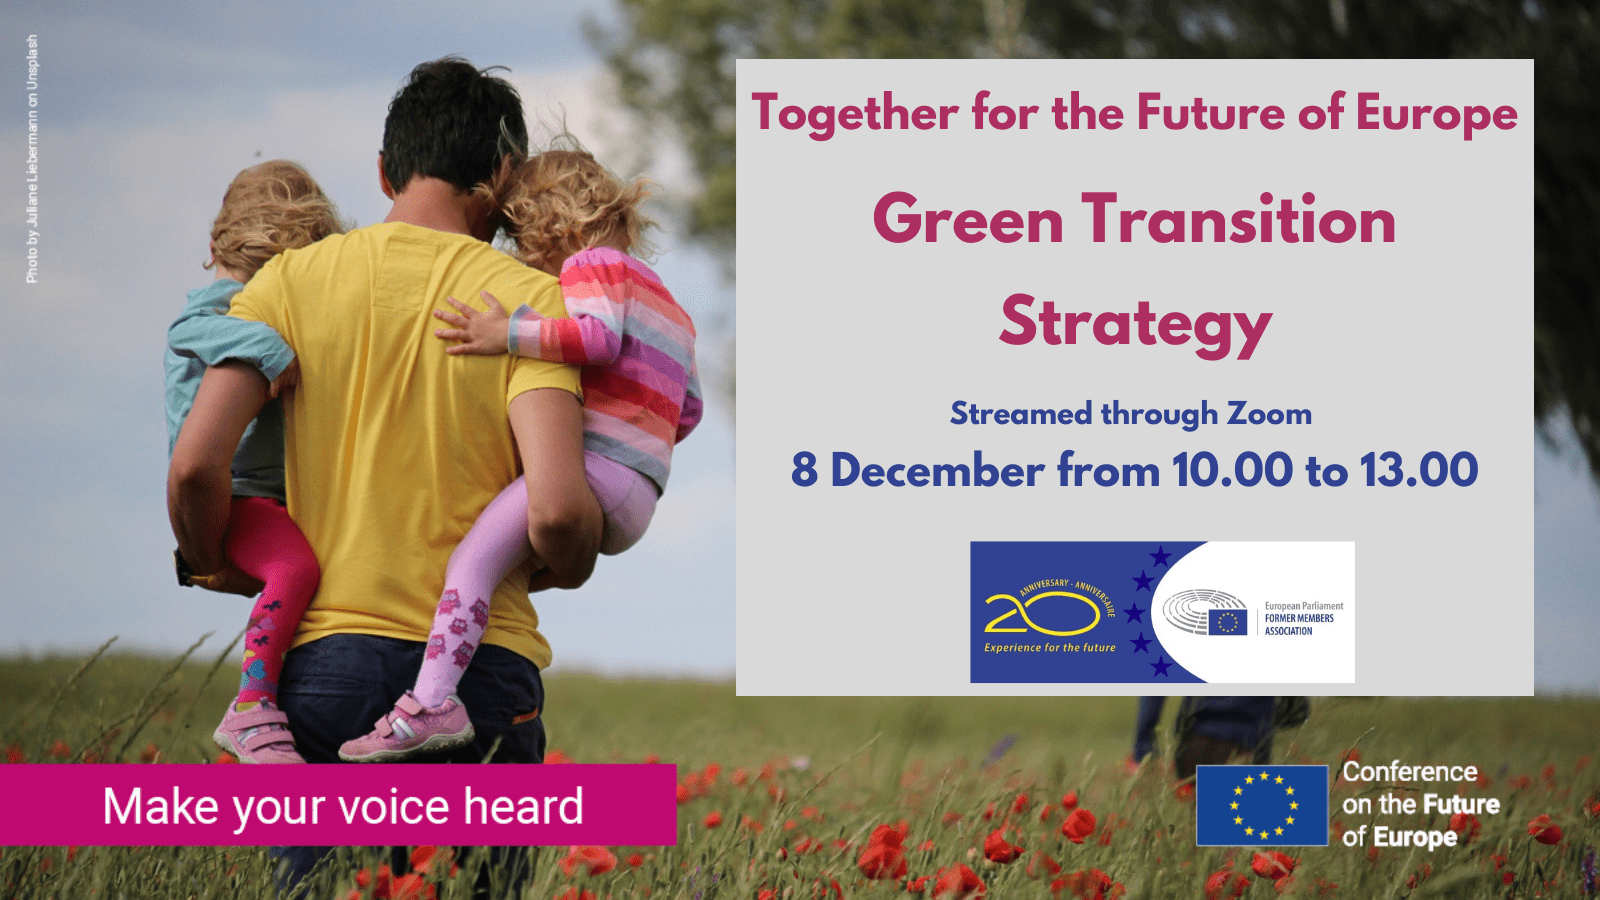 FMA Online Conference “Together for the future of Europe” on Green Transition Strategy